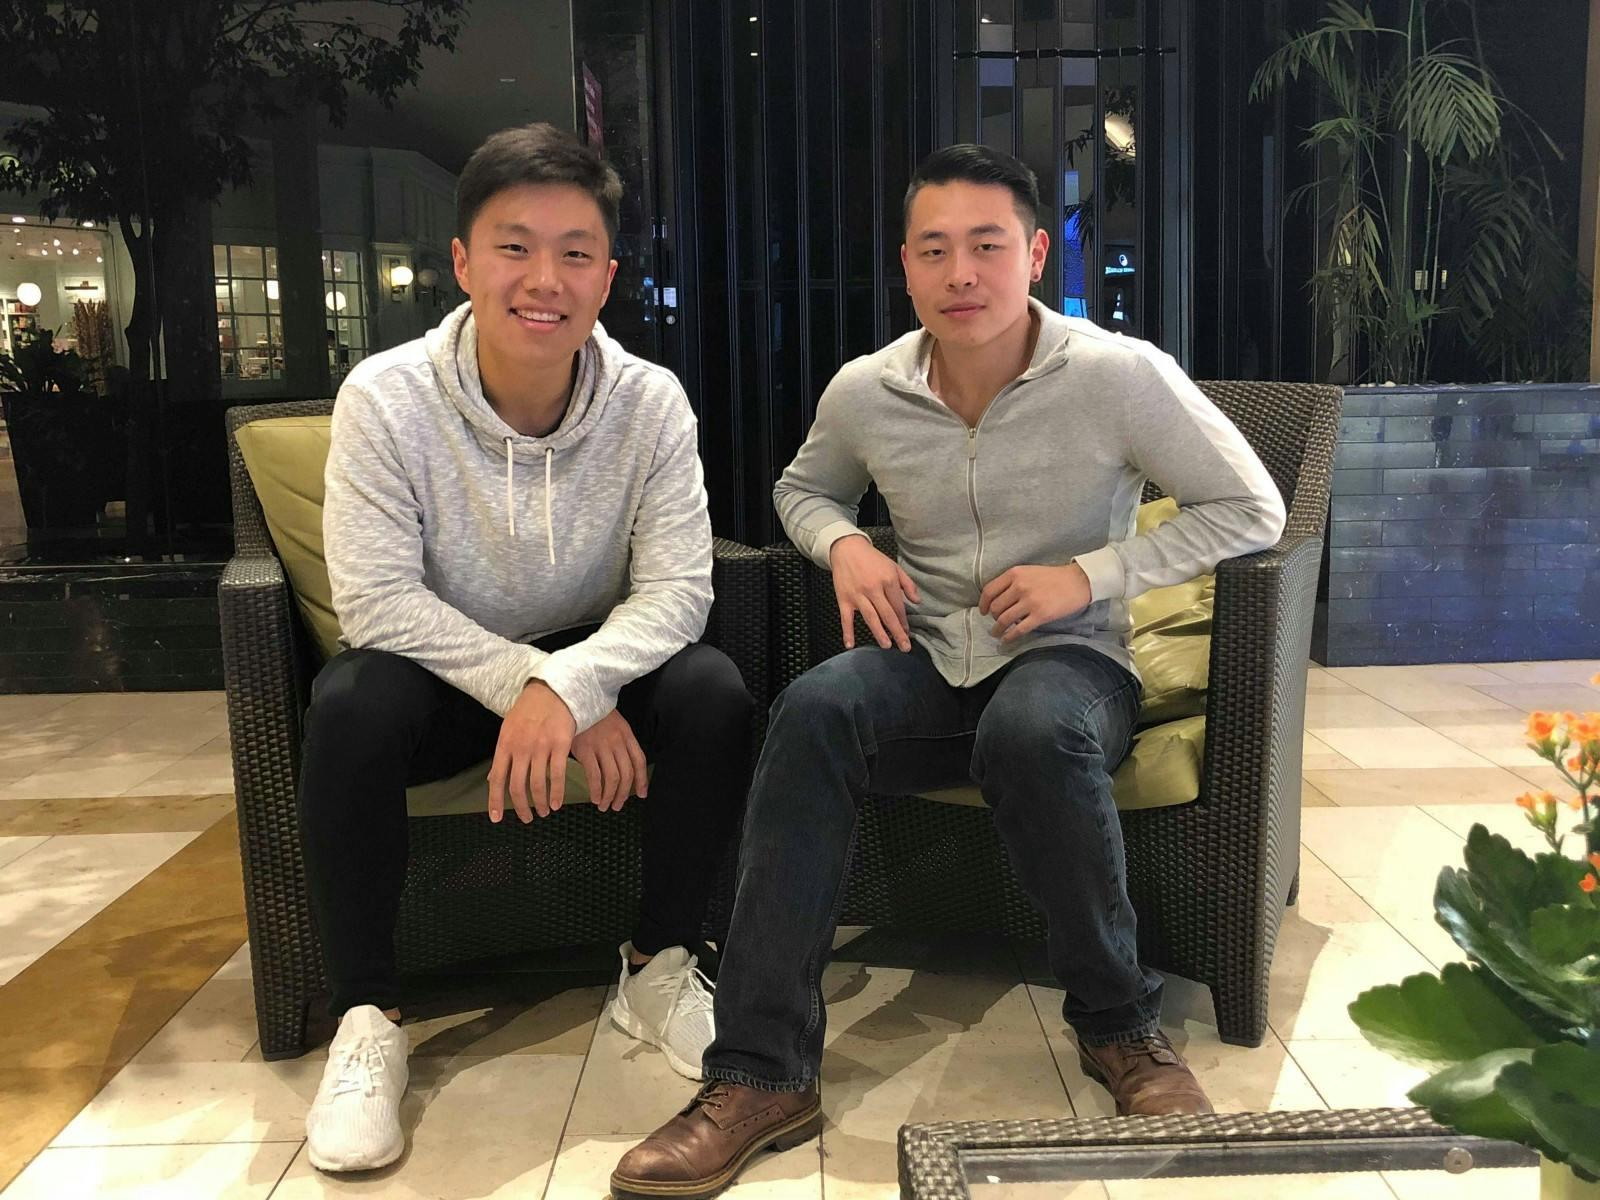 /founder-interviews-james-wu-and-allen-lu-of-adaptilab-8e3158d2a032 feature image